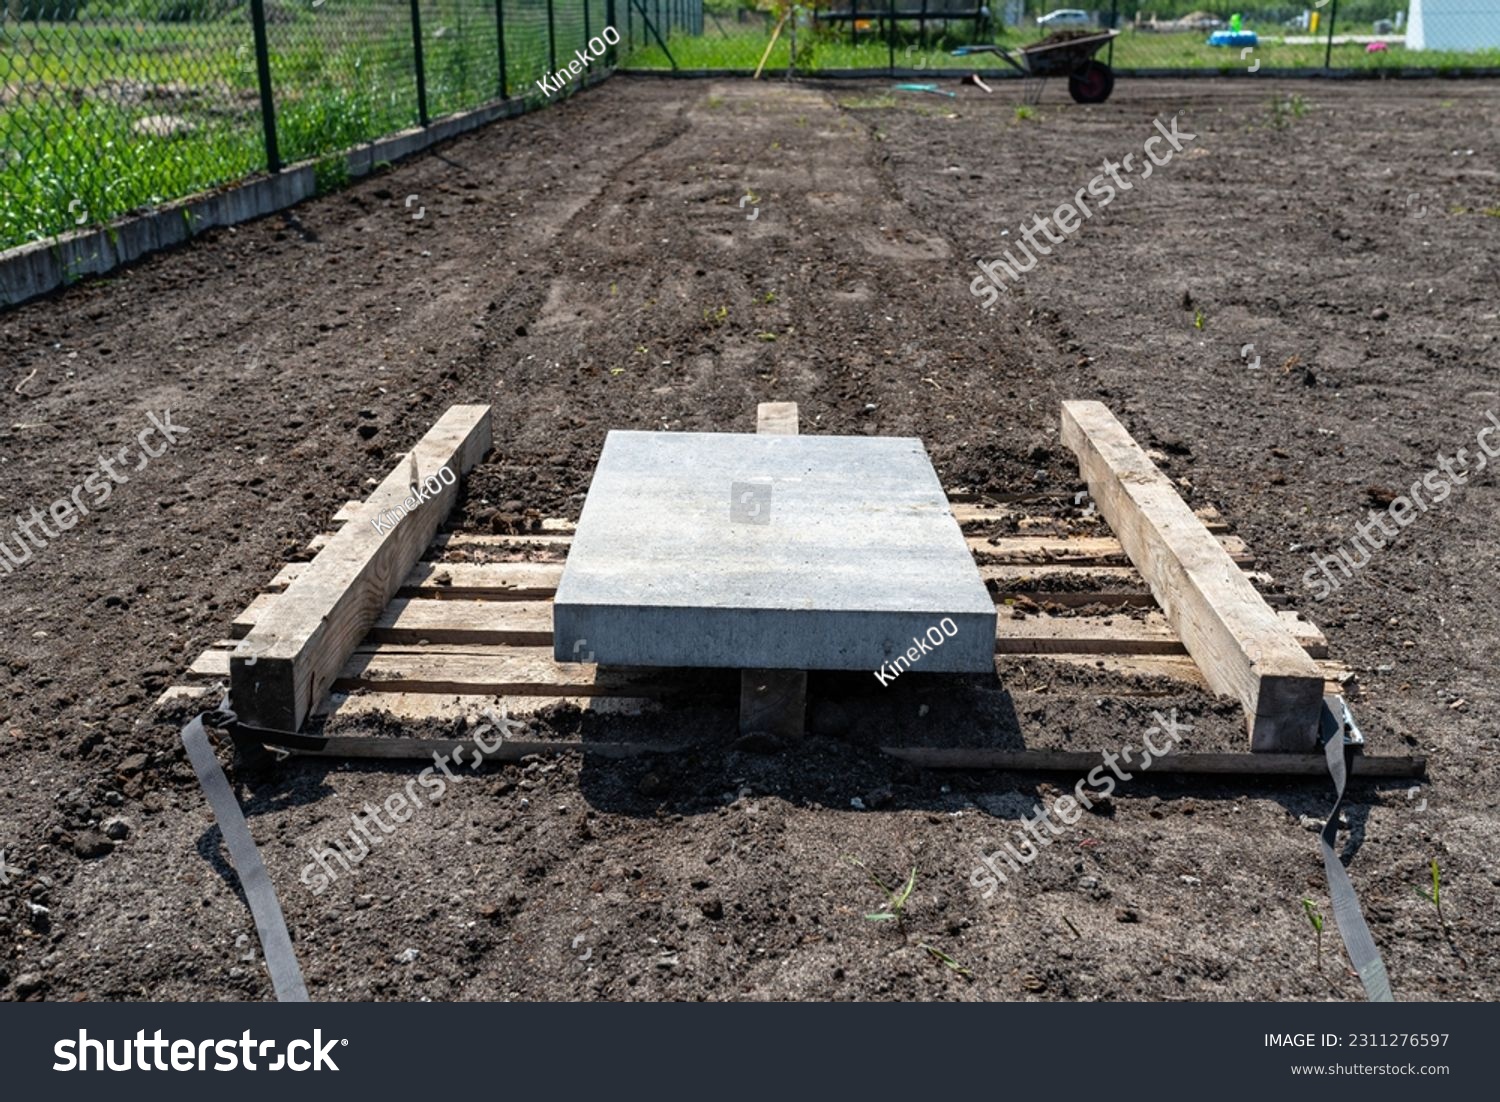 Leveling the chernozem in the yard with a pallet weighted with a concrete cube, preparing for sowing the lawn. #2311276597